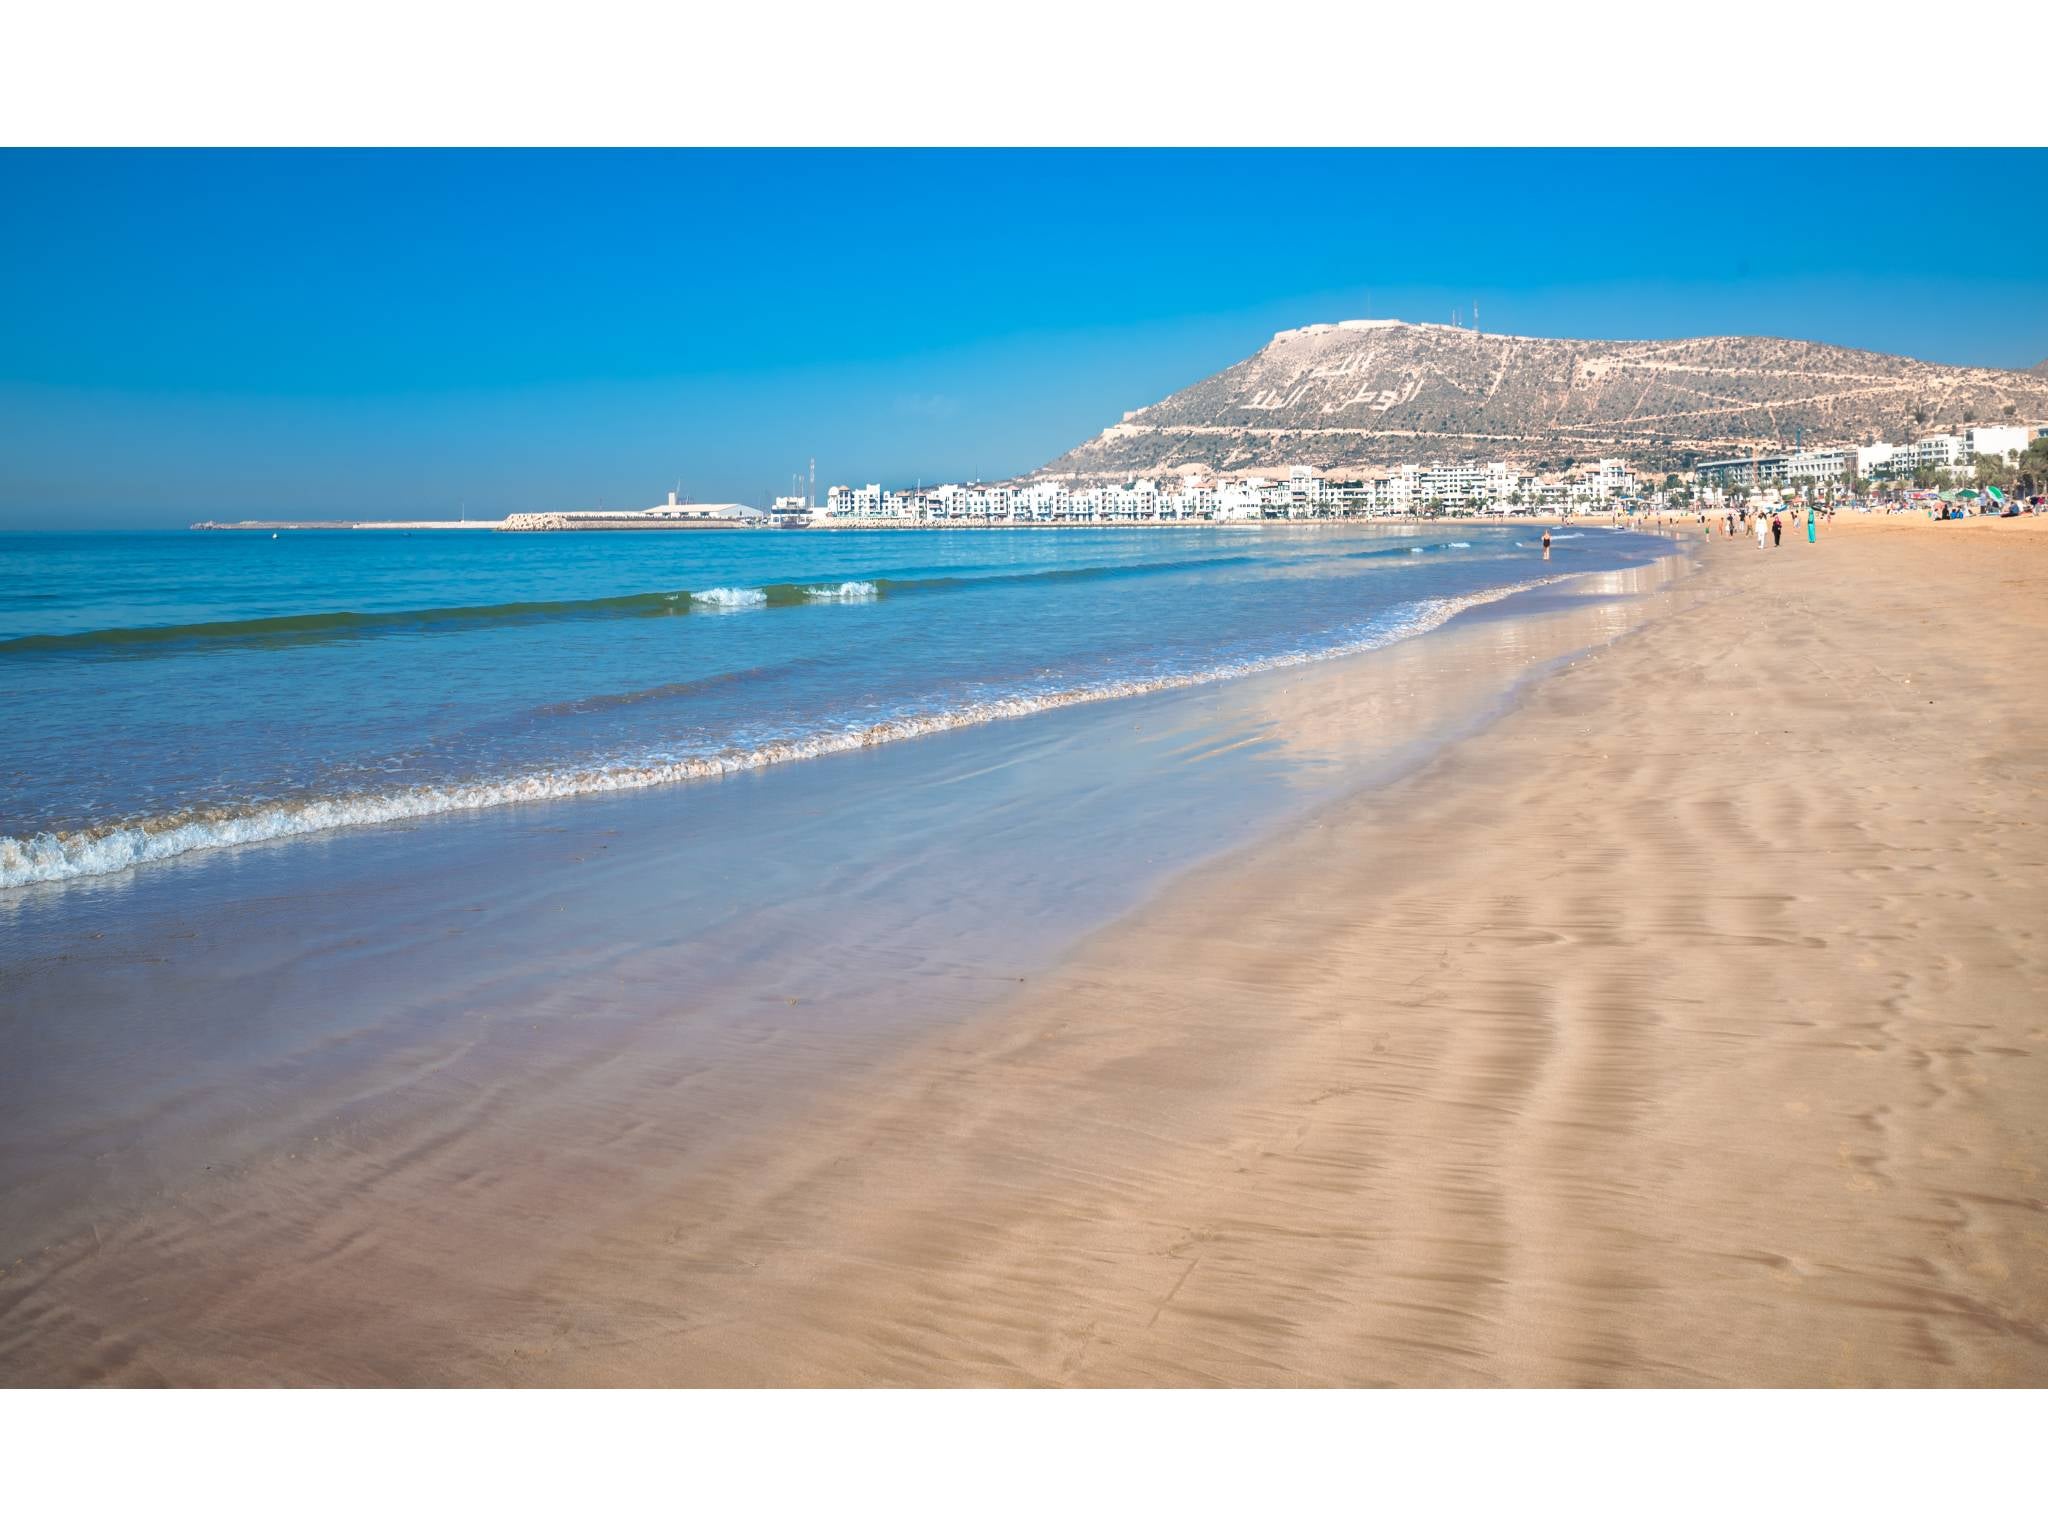 Agadir is home to a long stretch of beaches